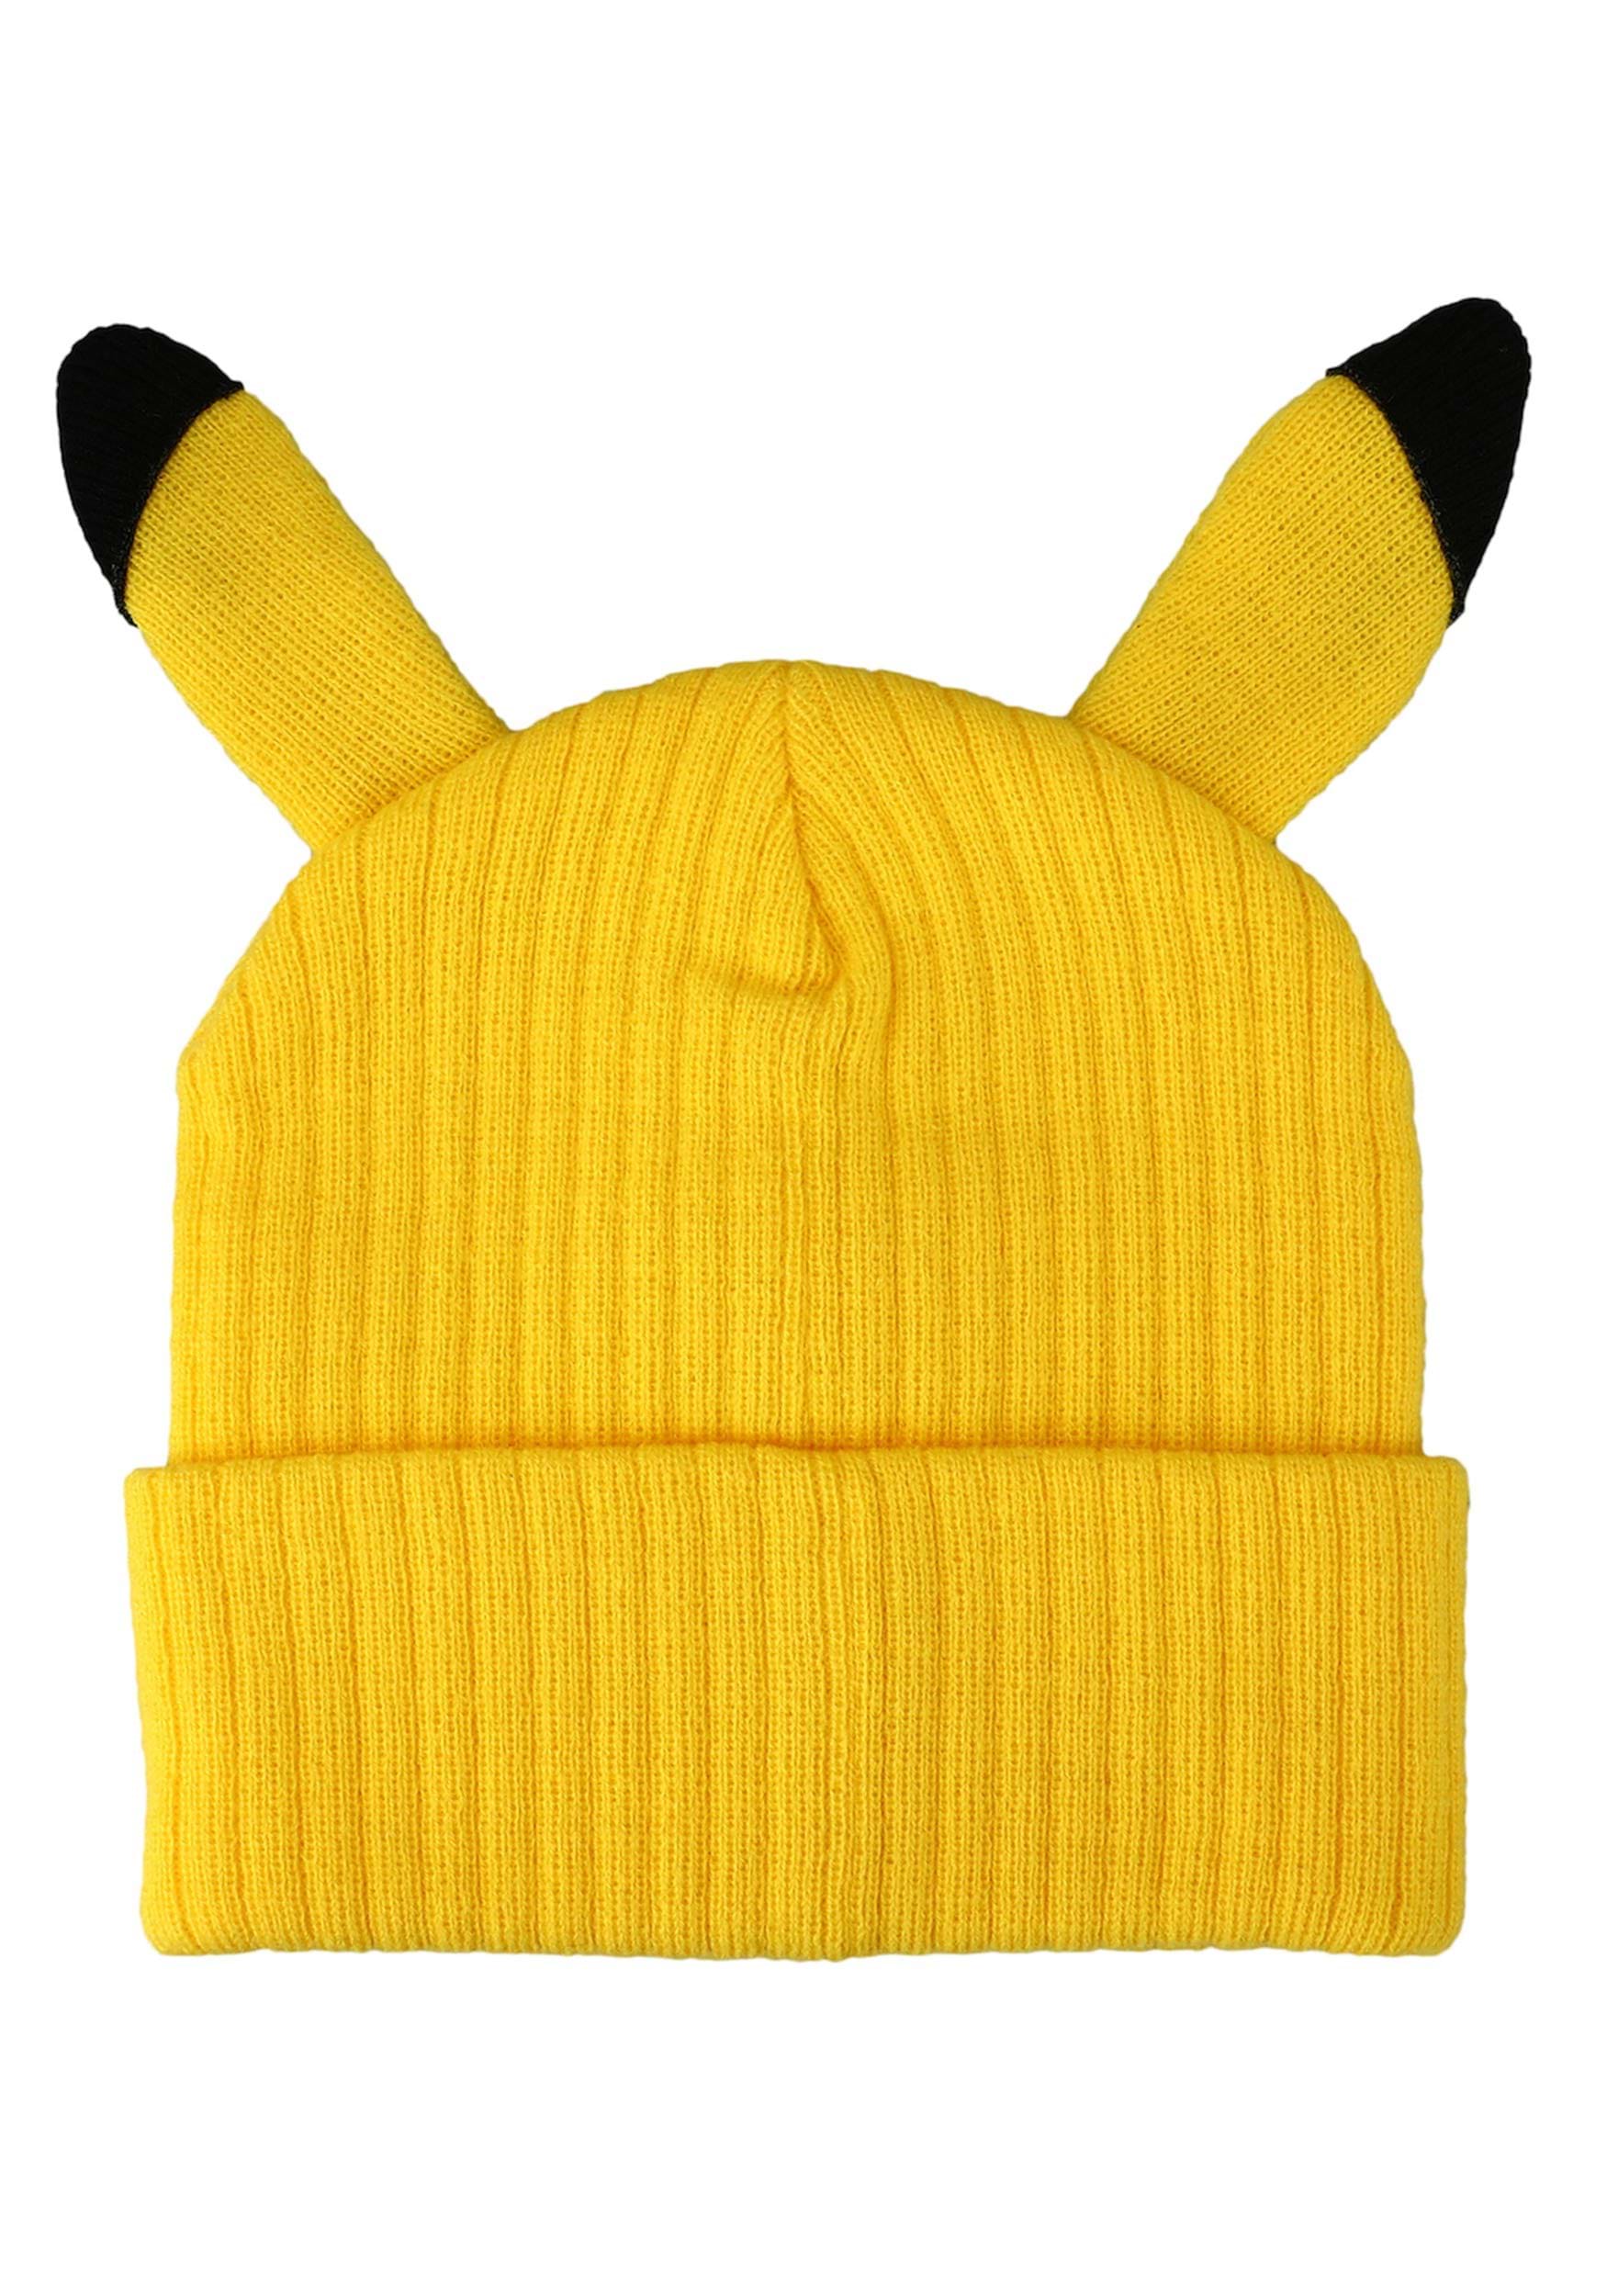 Five Nights at Freddy's Security Cuff Beanie